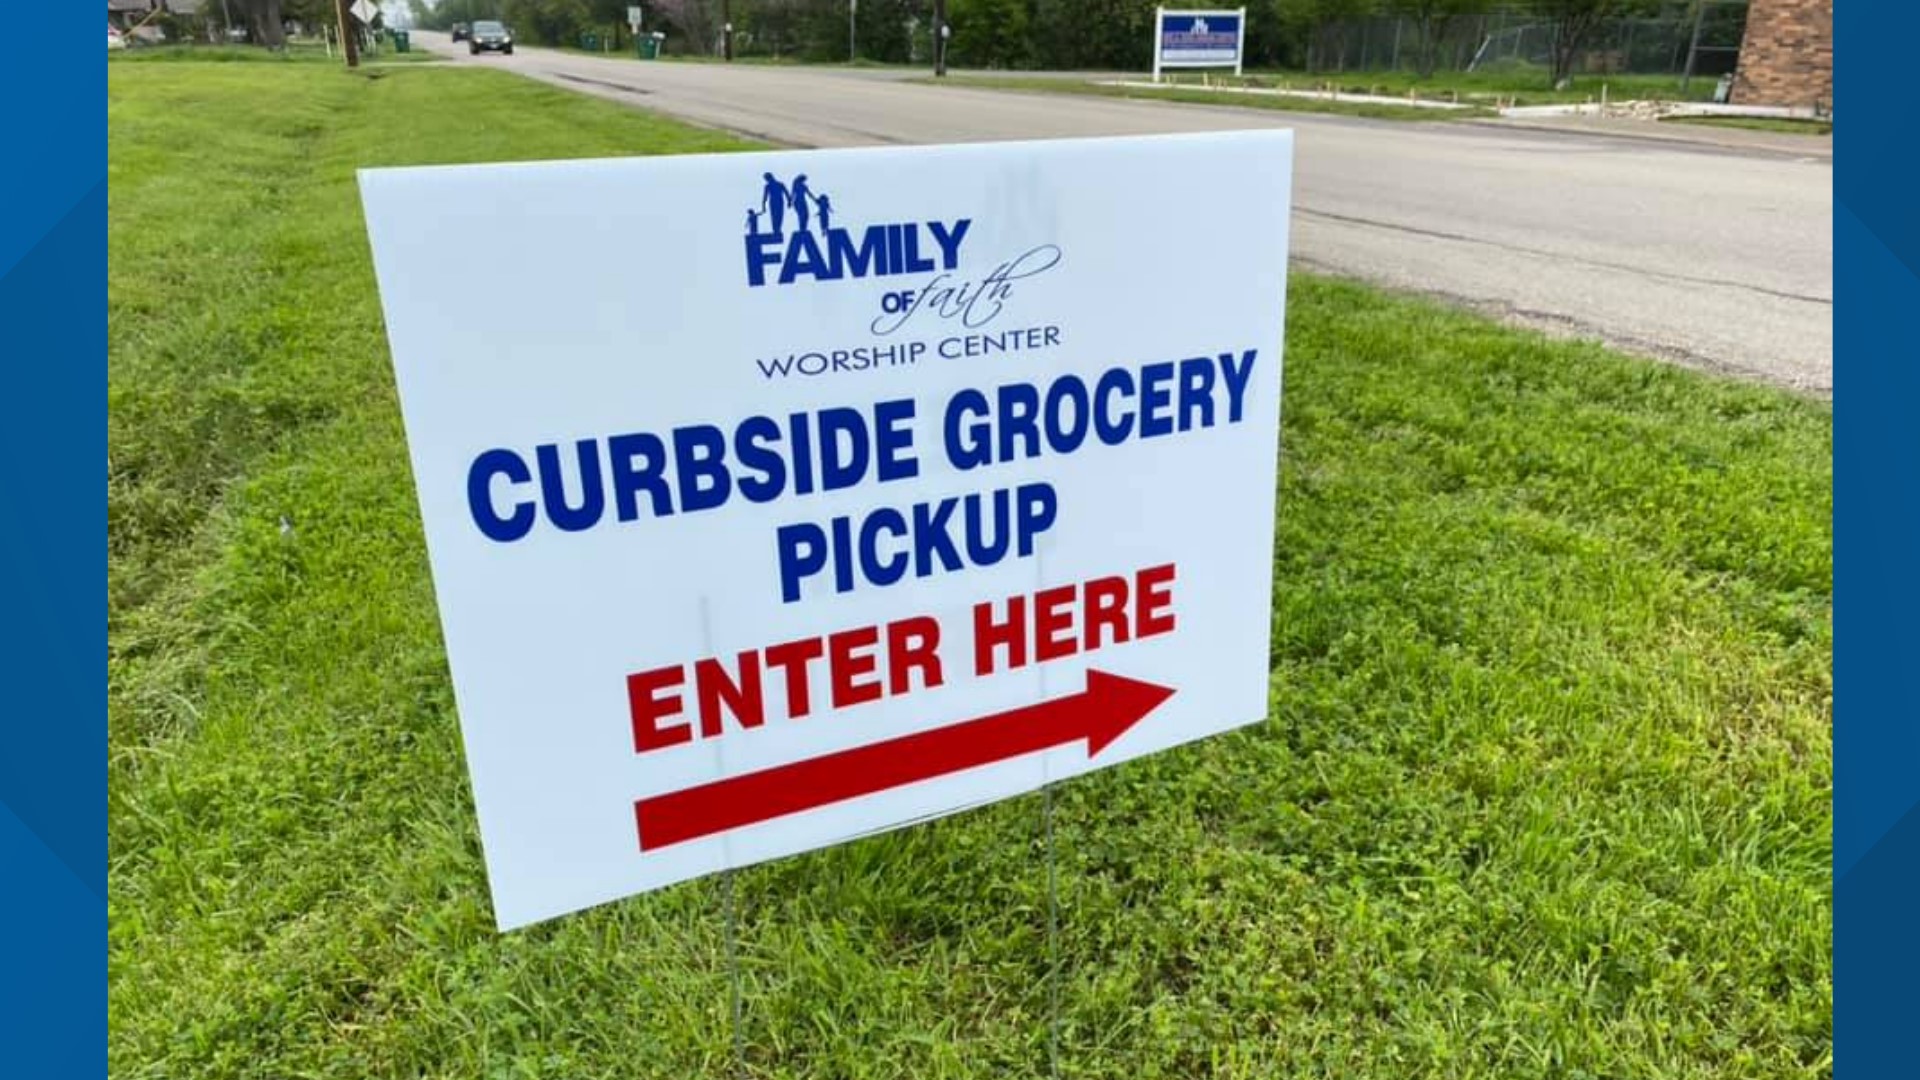 Family of Faith Worship Center in Waco is offering free curbside groceries Thursday starting at 10 a.m.